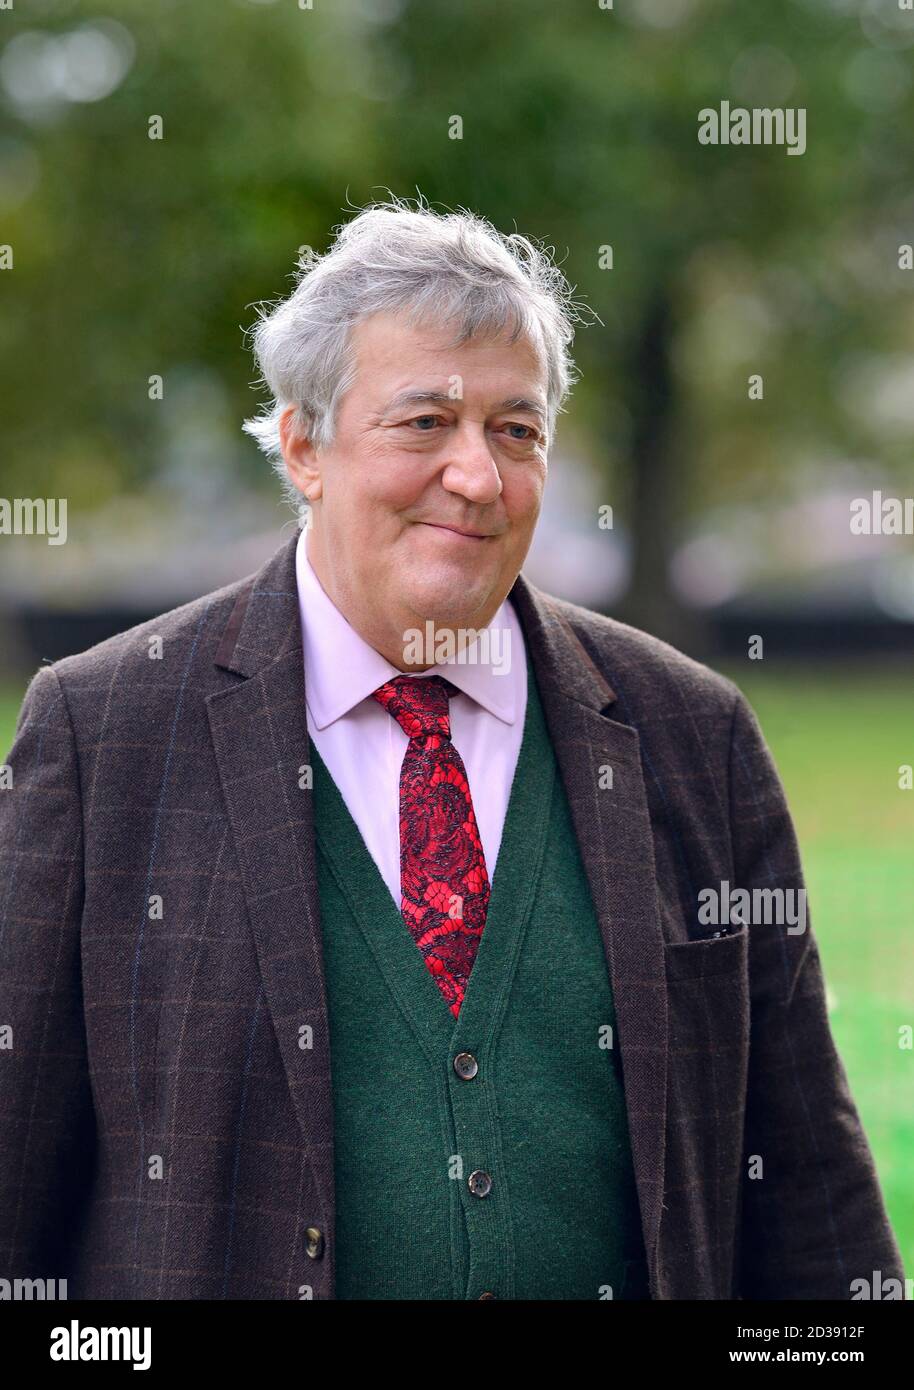 Stephen Fry - actor, comedian and writer - in Westminster after filming an interview. October 2020 Stock Photo